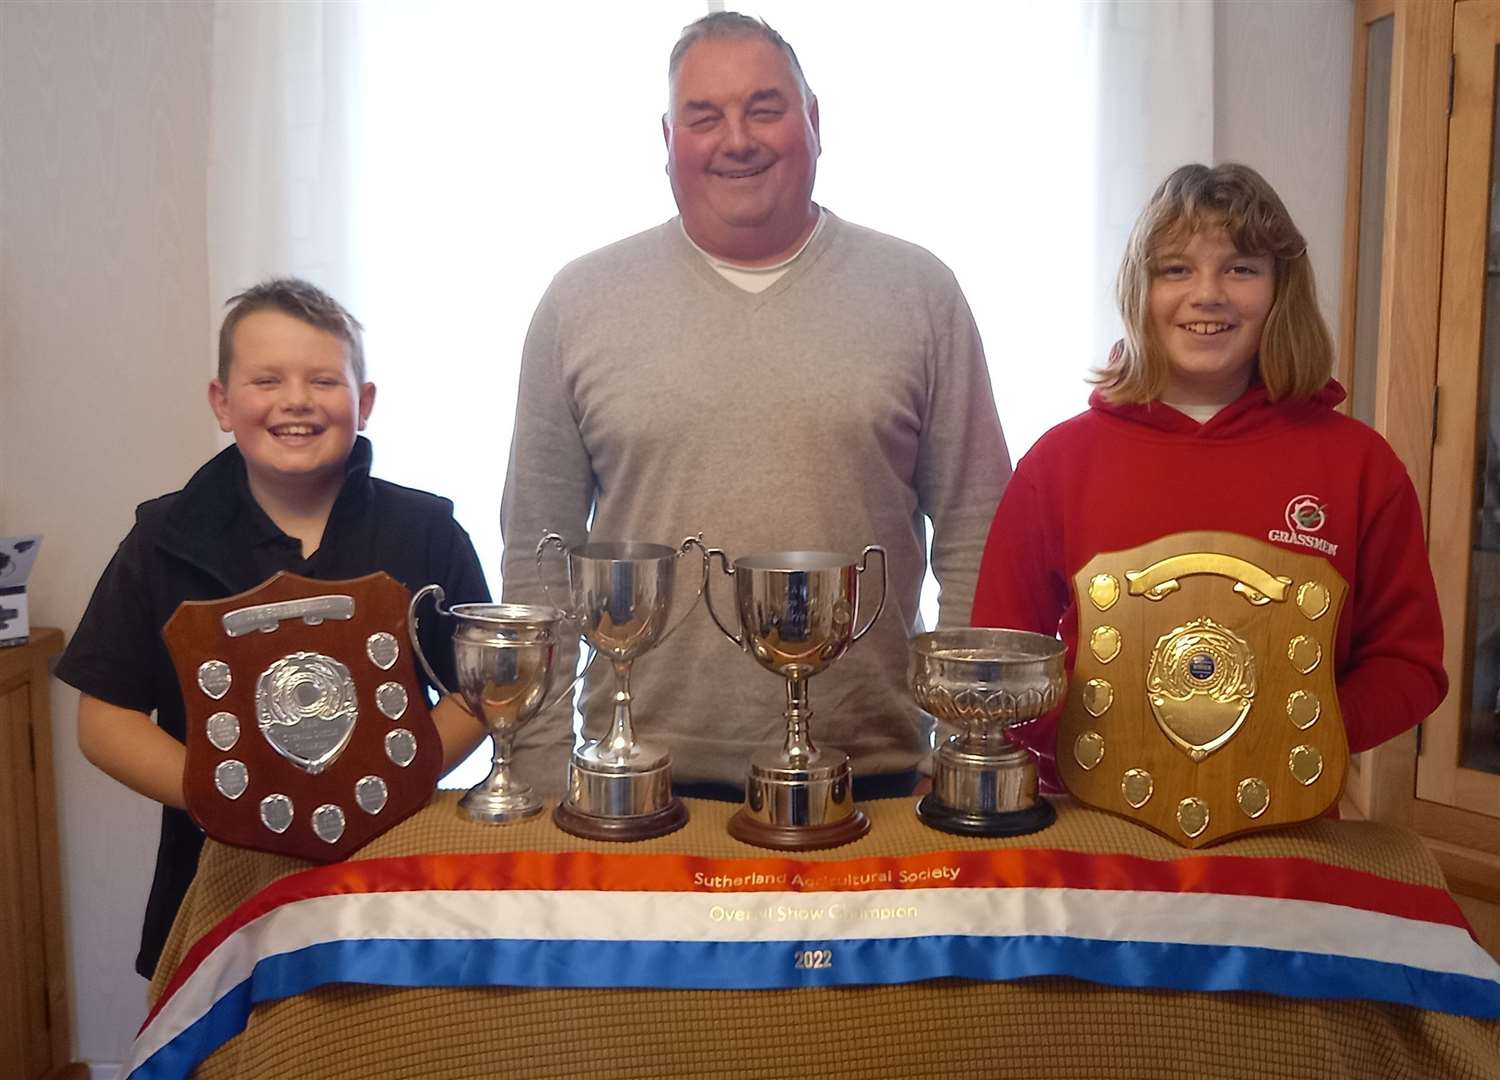 Crofter John Smith, with his son Kyle and daughter Katie, shows off some of the trophies he won this year.